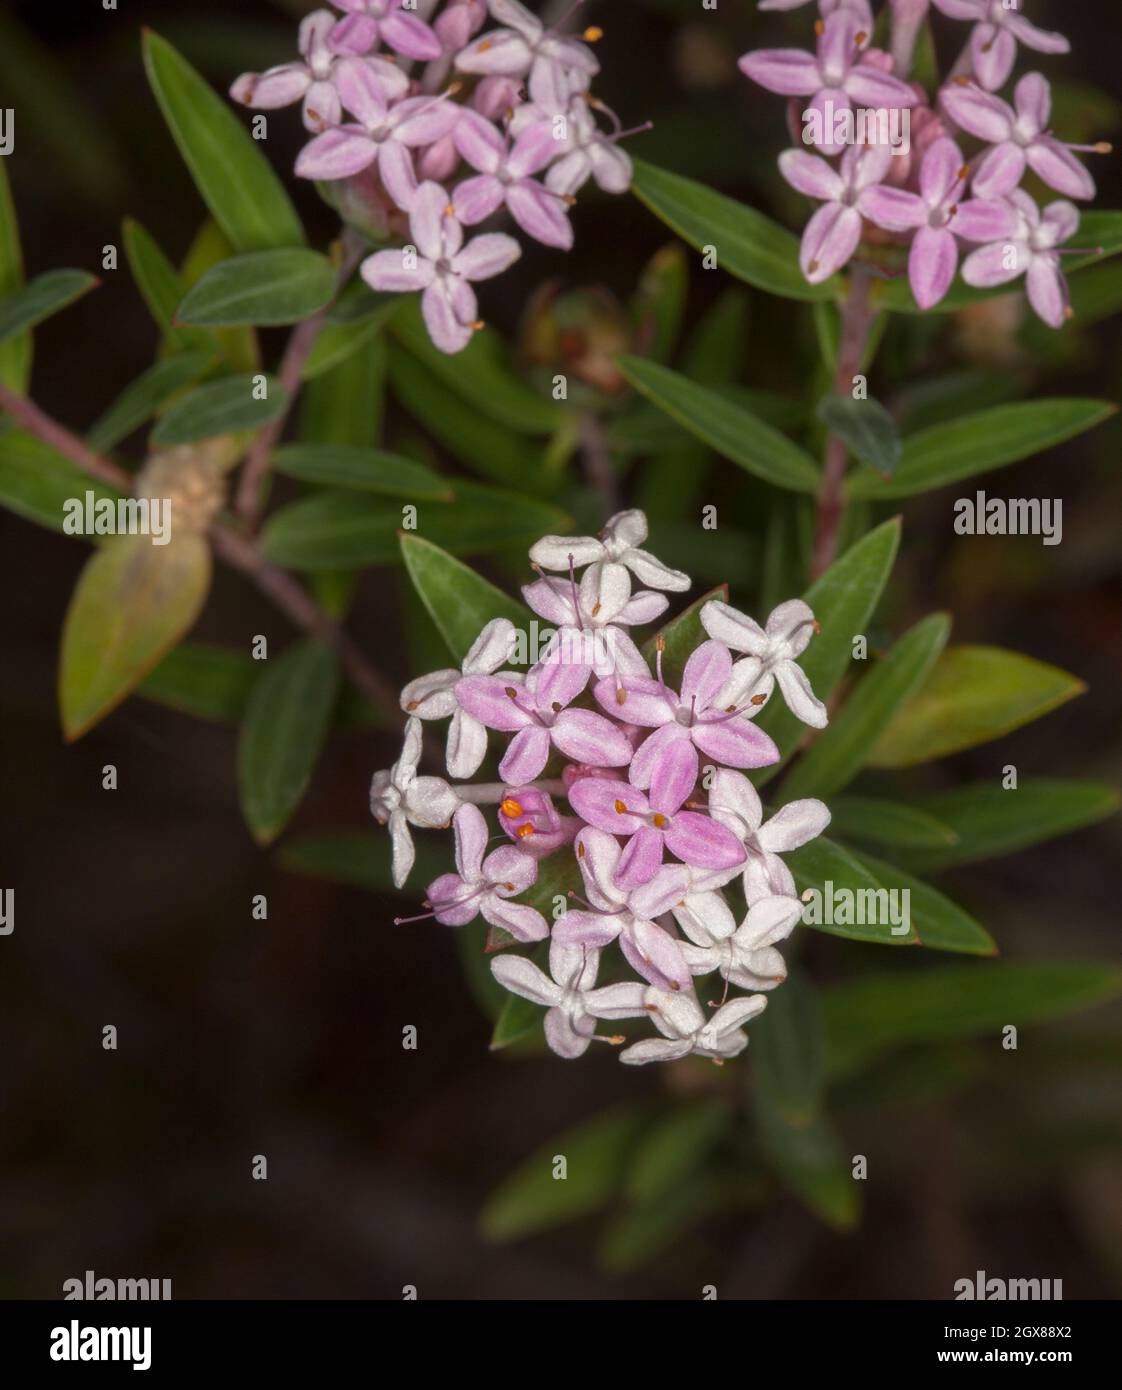 Clusters of pale pink flowers and green foliage of Pimelea species, wildflowers at Kroombit Tops National Park in Queensland Australia Stock Photo